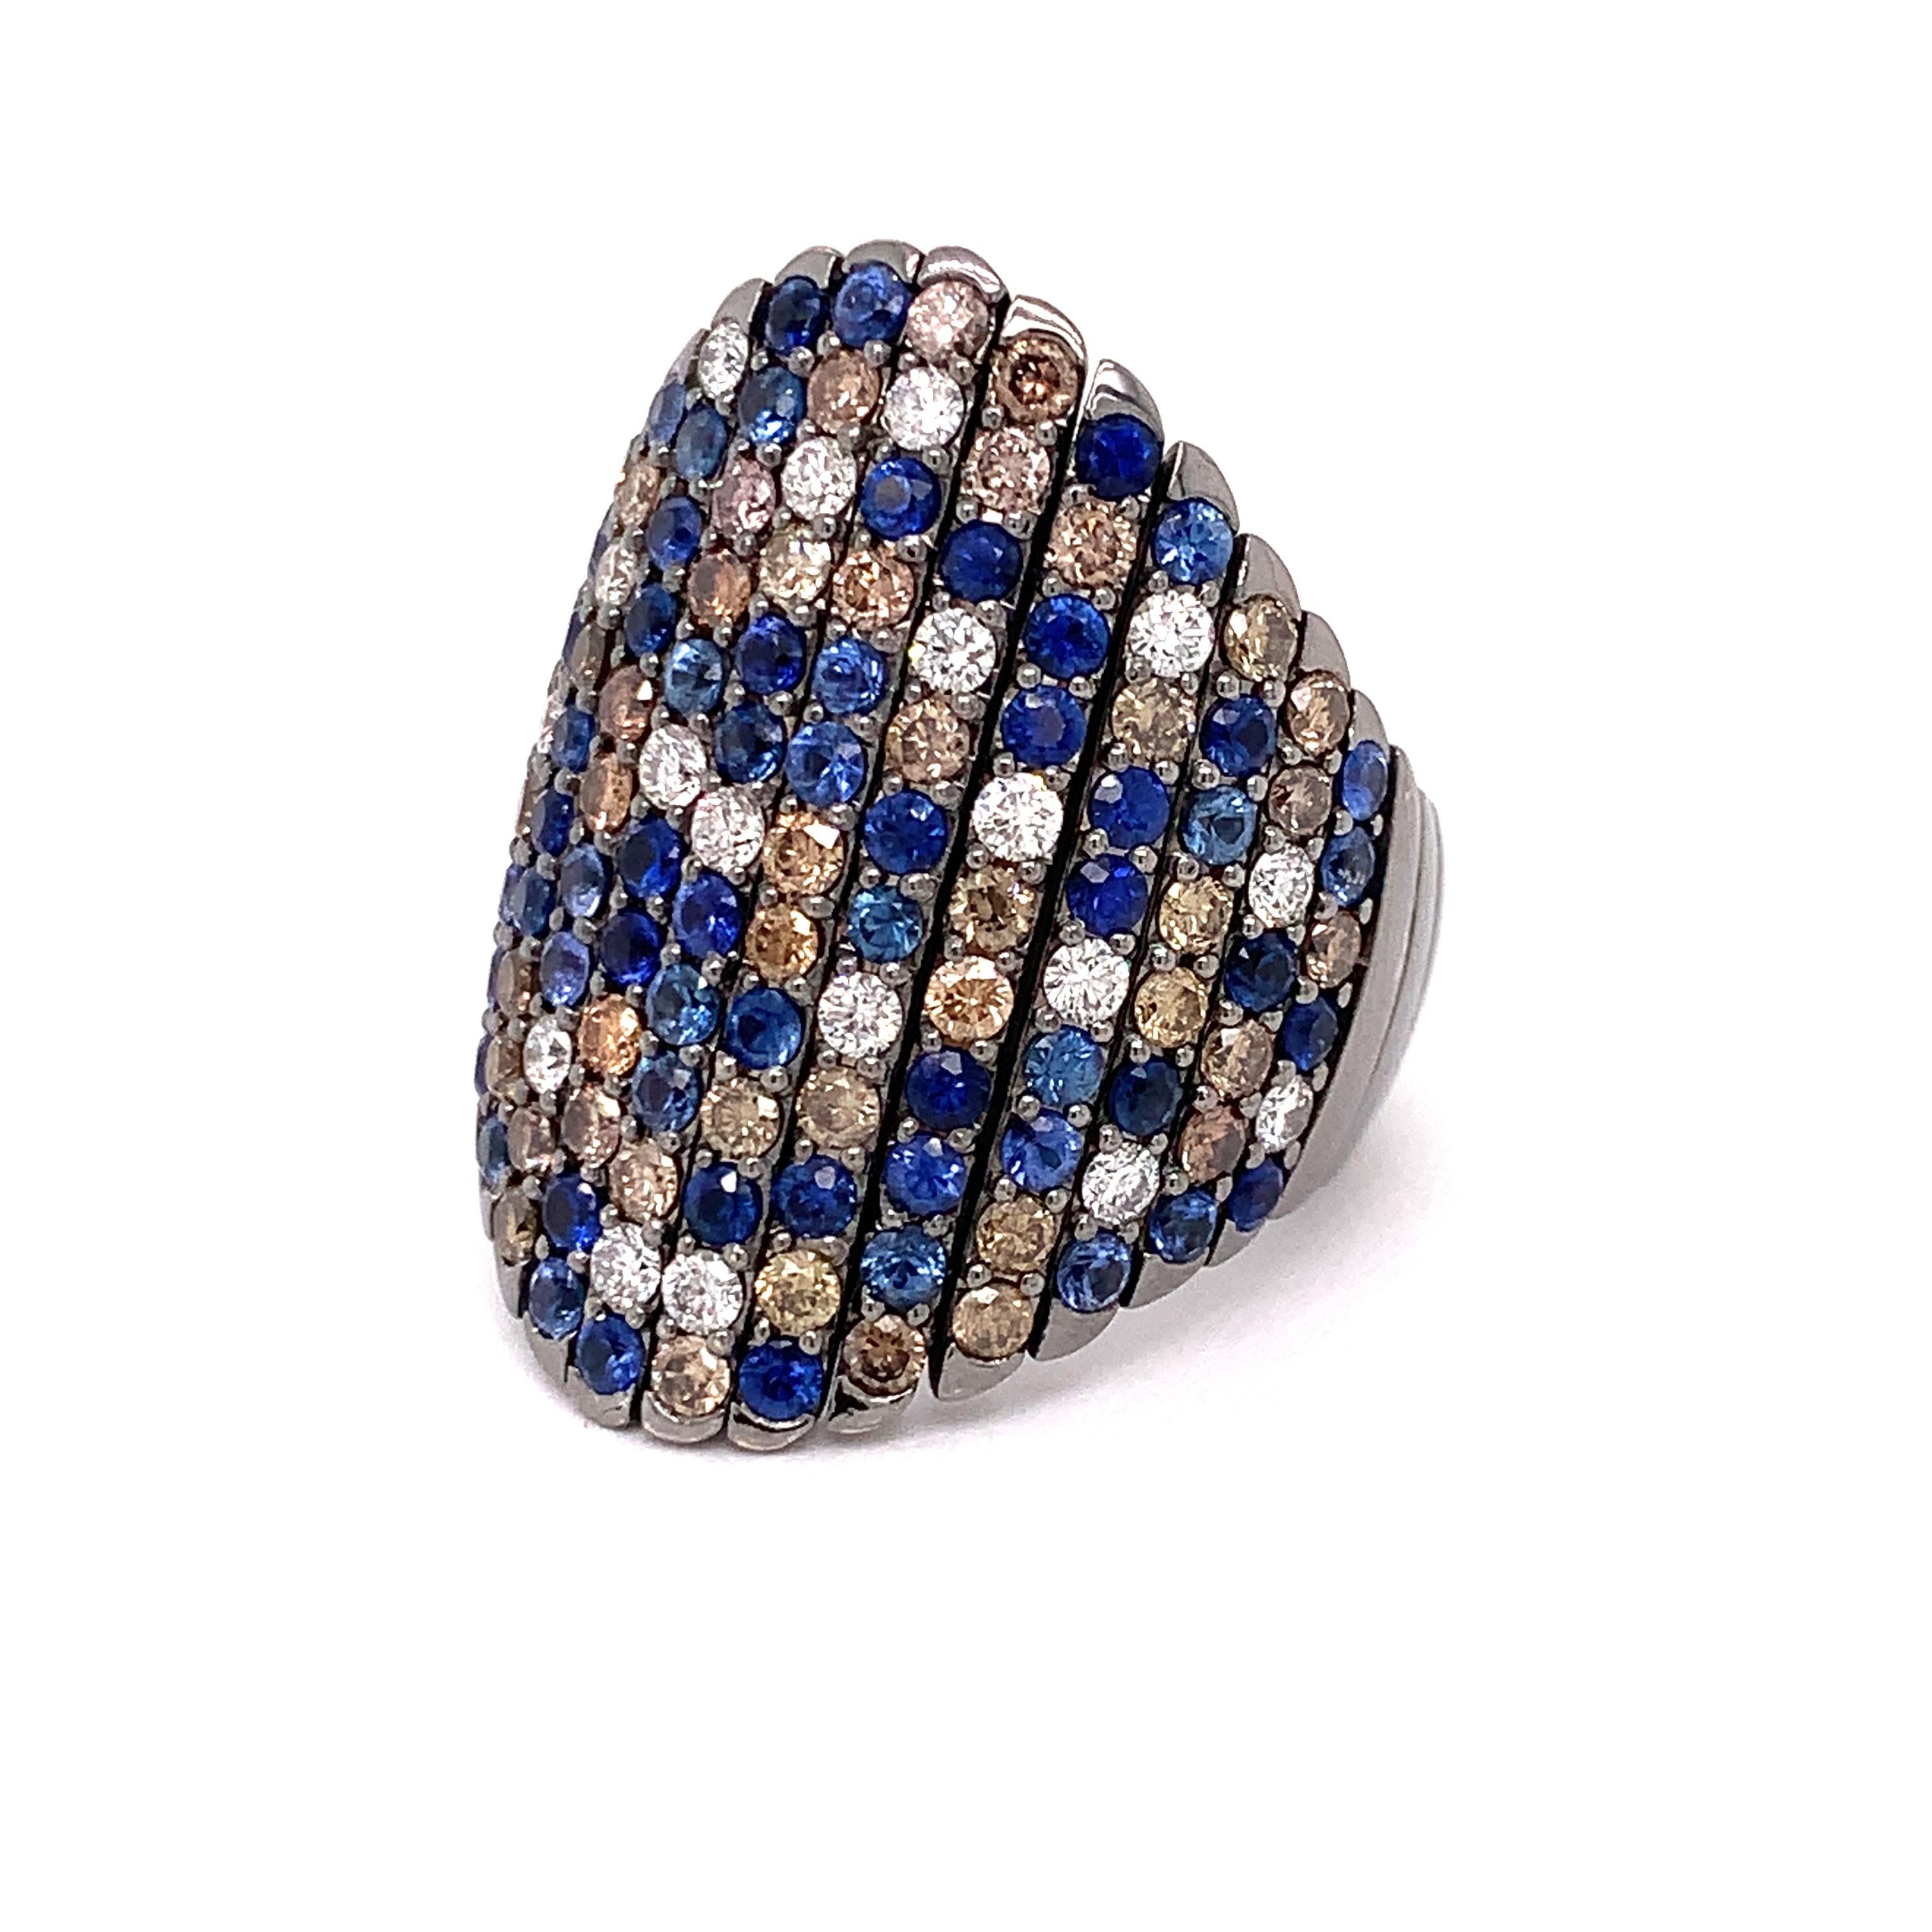 This amazing Crivelli ring checks all the boxes.  Elegant with an array of white and champagne diamonds and blue sapphires.  Sophisticated with black rhodium finish over 18 Kt white gold. Comfortable with a flex band, smooth finish and low profile. 